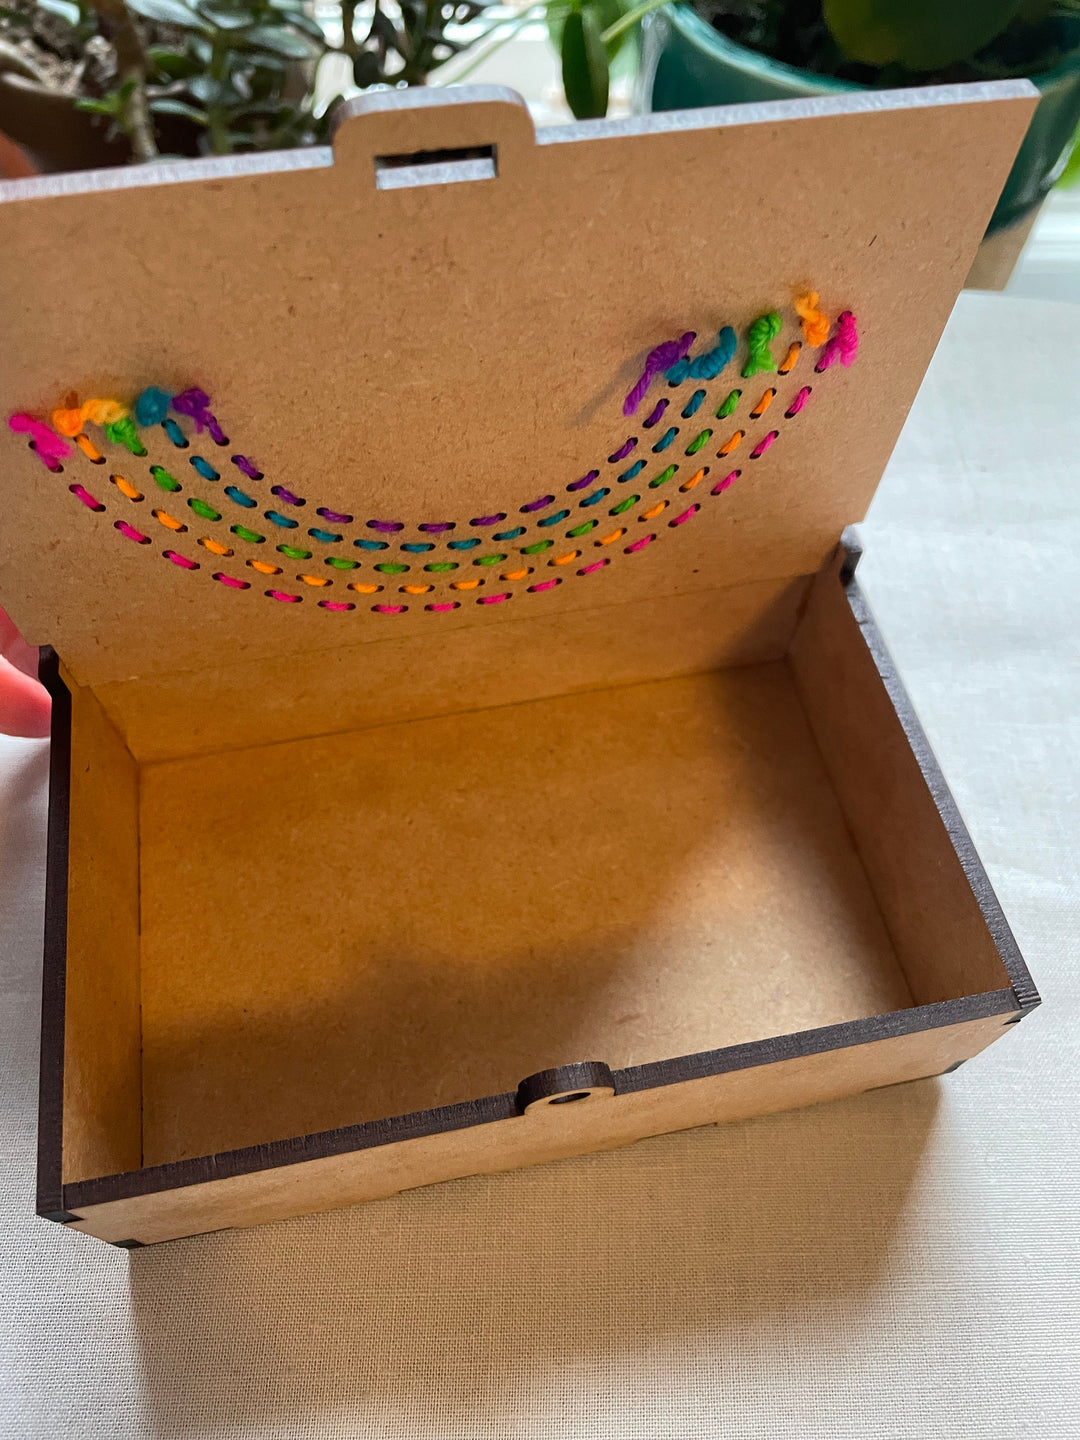 Crafts for All Stitchable Wooden Box